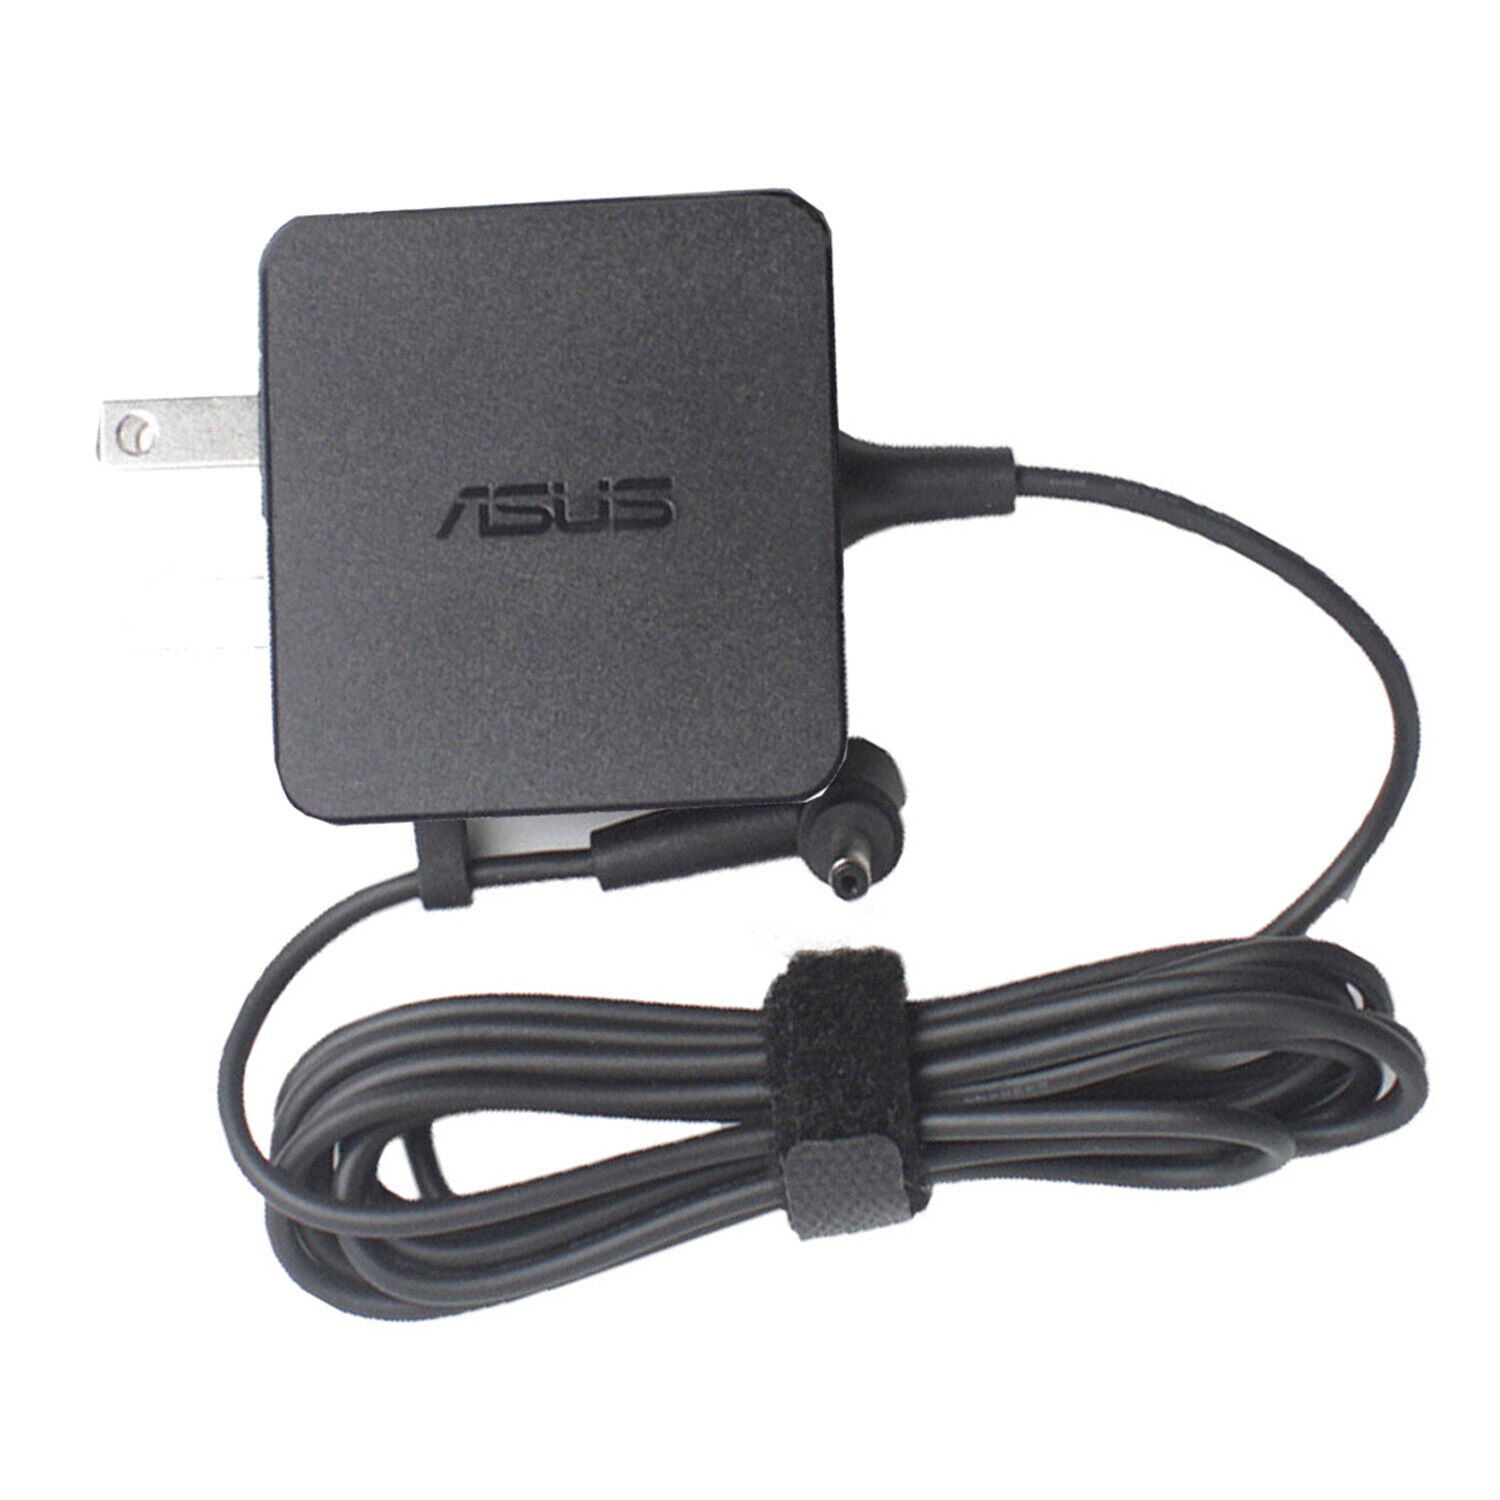 For Asus ADP-33AW Ac Laptop Charger Adapter Charger Power Supply 19V 1.75A 4.0mm